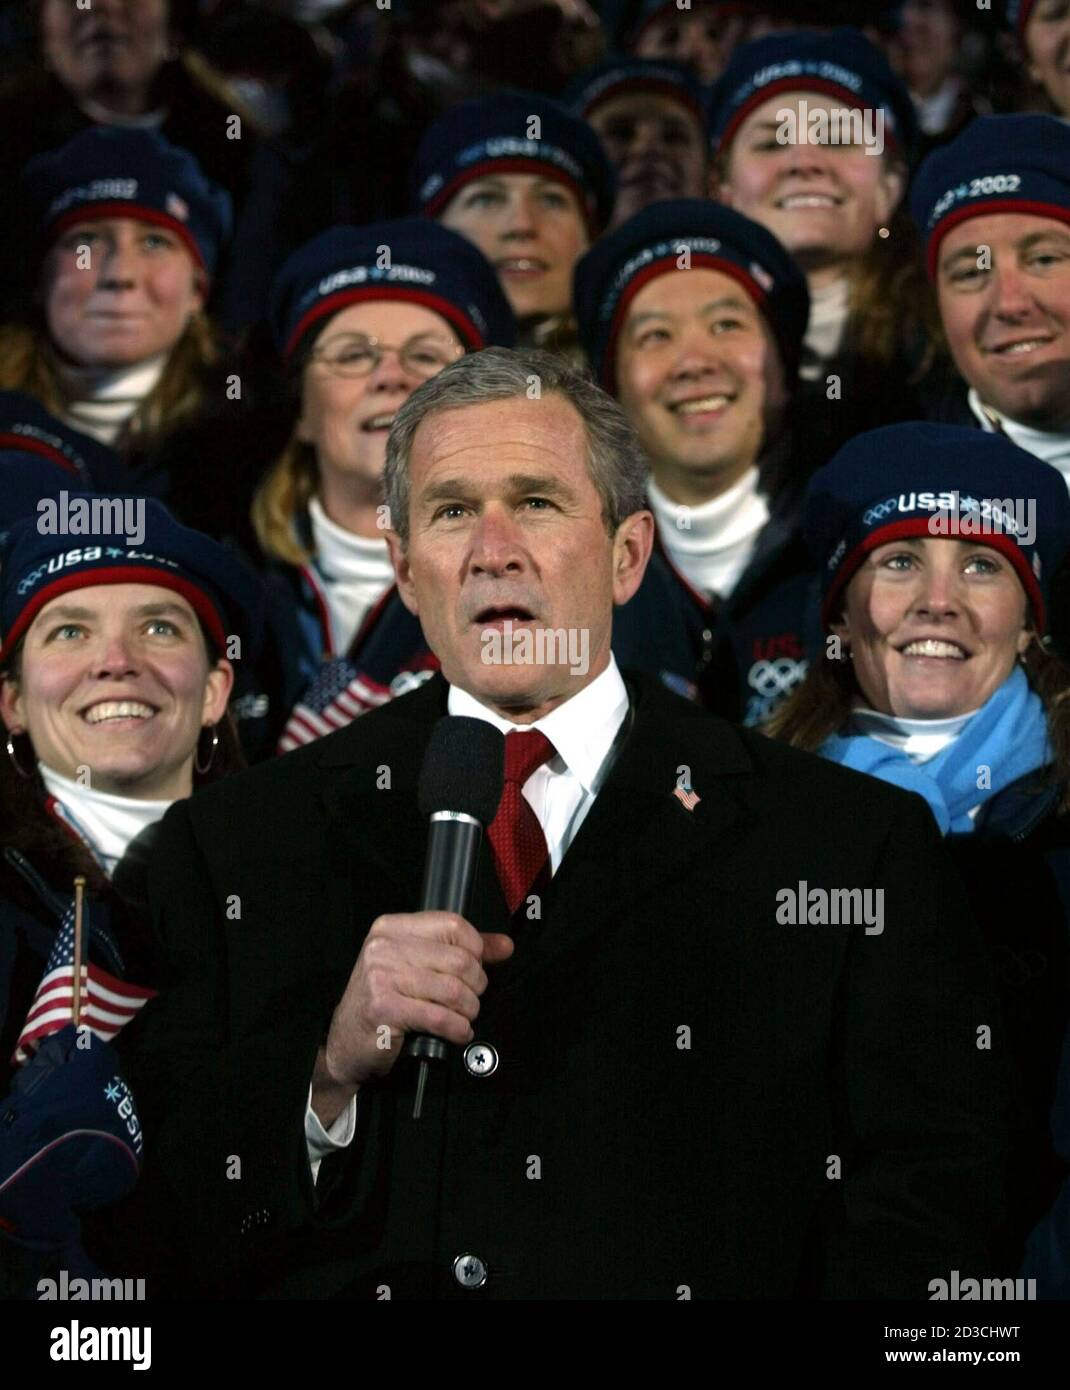 U.S. President George W. Bush officially opens the Salt Lake 2002 Olympic  Winter Games during the opening ceremony of the Salt Lake 2002 Winter  Olympic Games, February 8, 2002. Athletes from 77